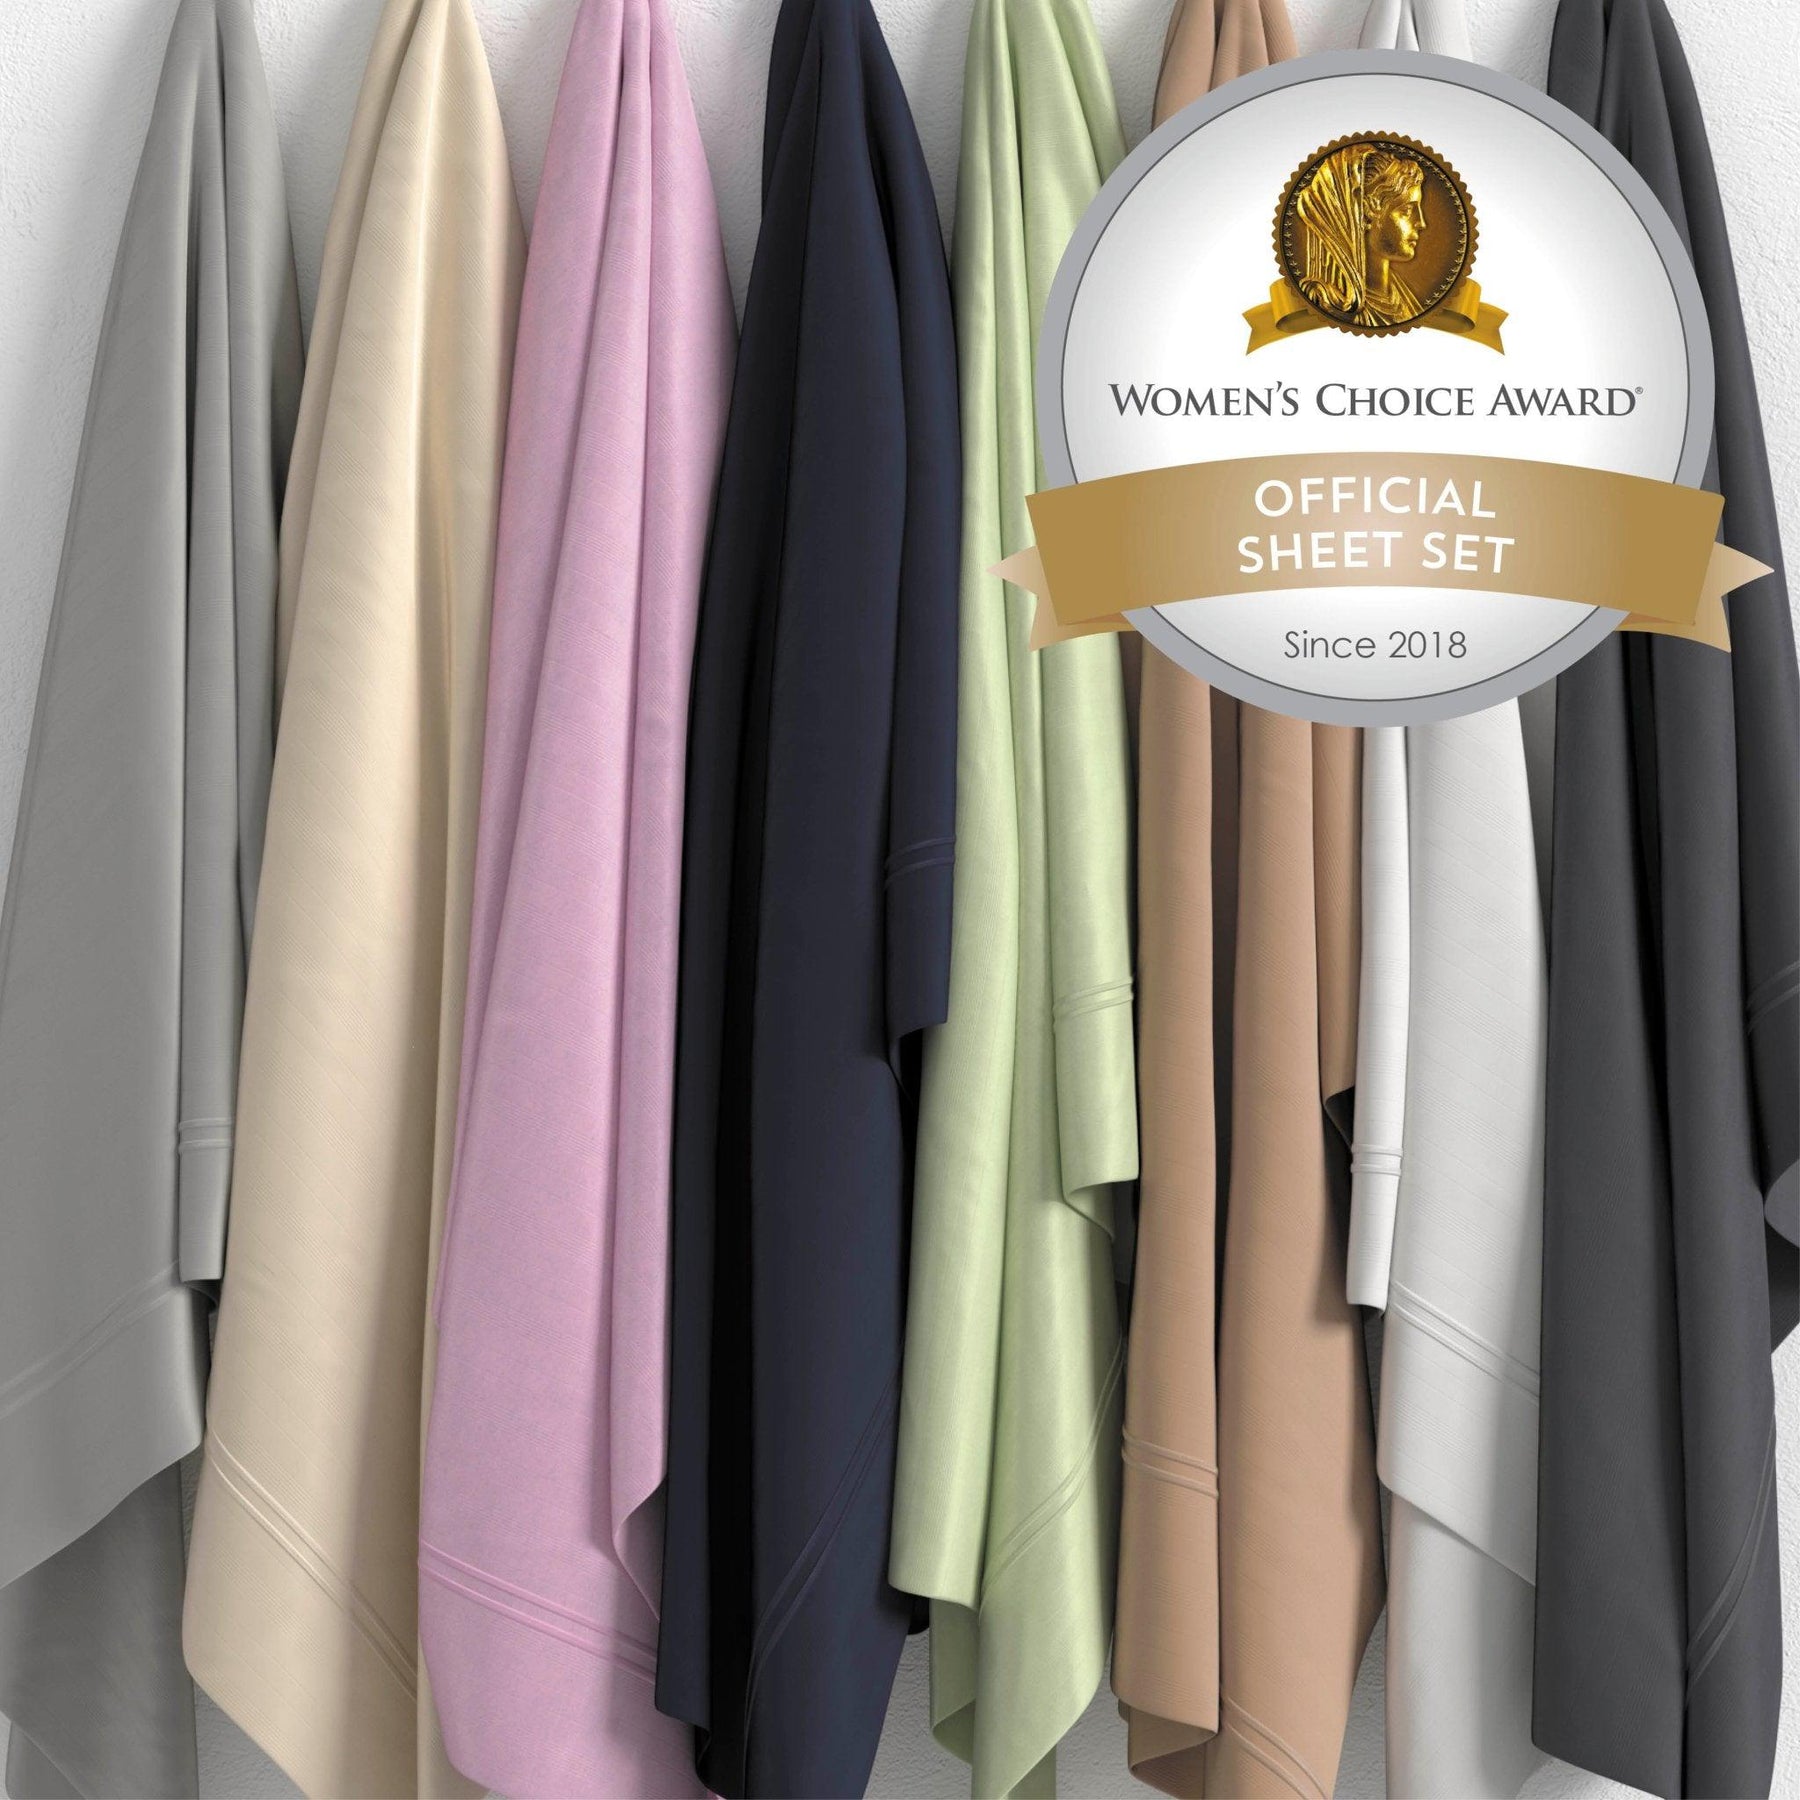 Image of all Bamboo Rayon Sheet colors hanging against a white wall (from left to right): Dover Gray, Ivory, Lilac, Midnight, Sage, Sand, White, Shadow. There's a sticker reading: "Woman's Choice Award Official Sheet Set Since 2018" in the top right corner. 